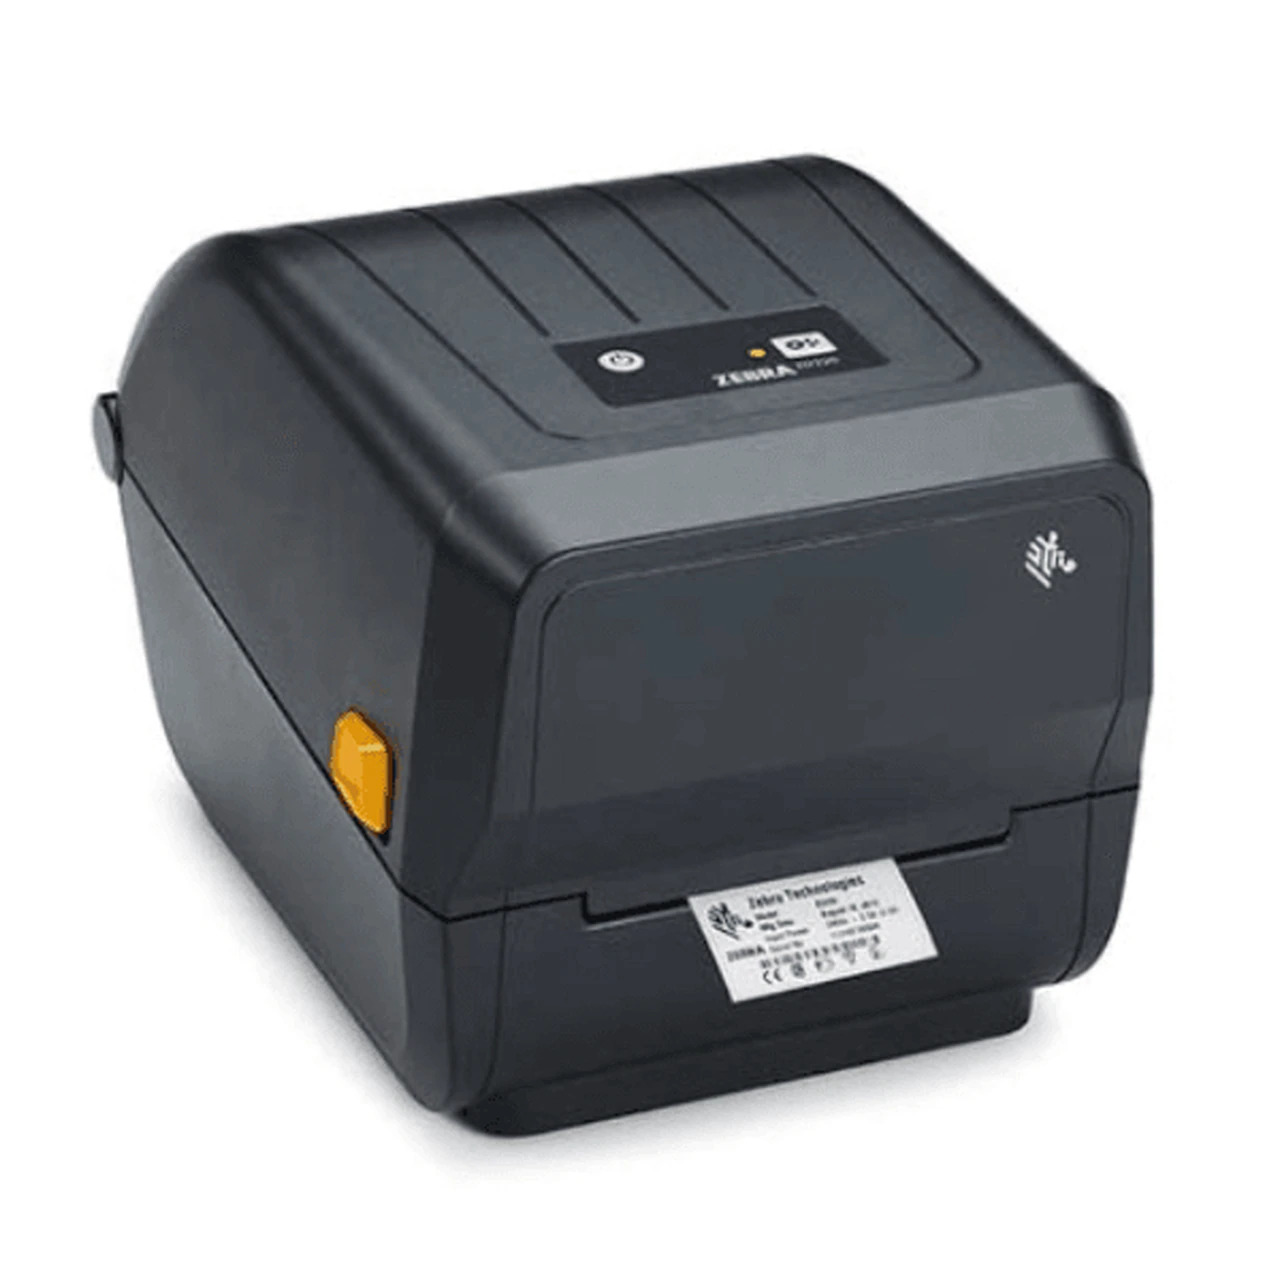 Zebra ZD220T 4-Inch Thermal Transfer Label Printer with USB Cable